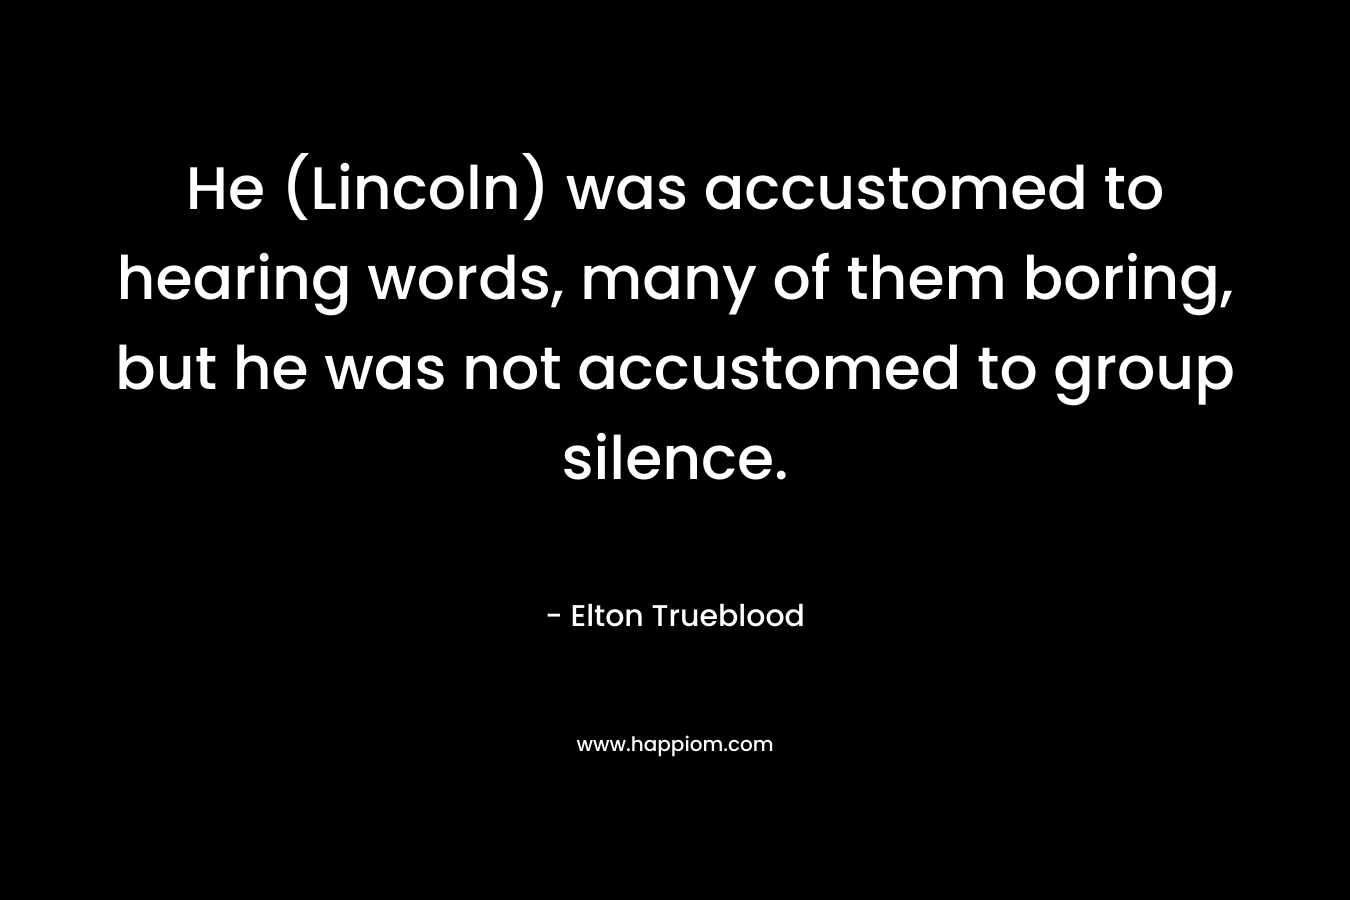 He (Lincoln) was accustomed to hearing words, many of them boring, but he was not accustomed to group silence.